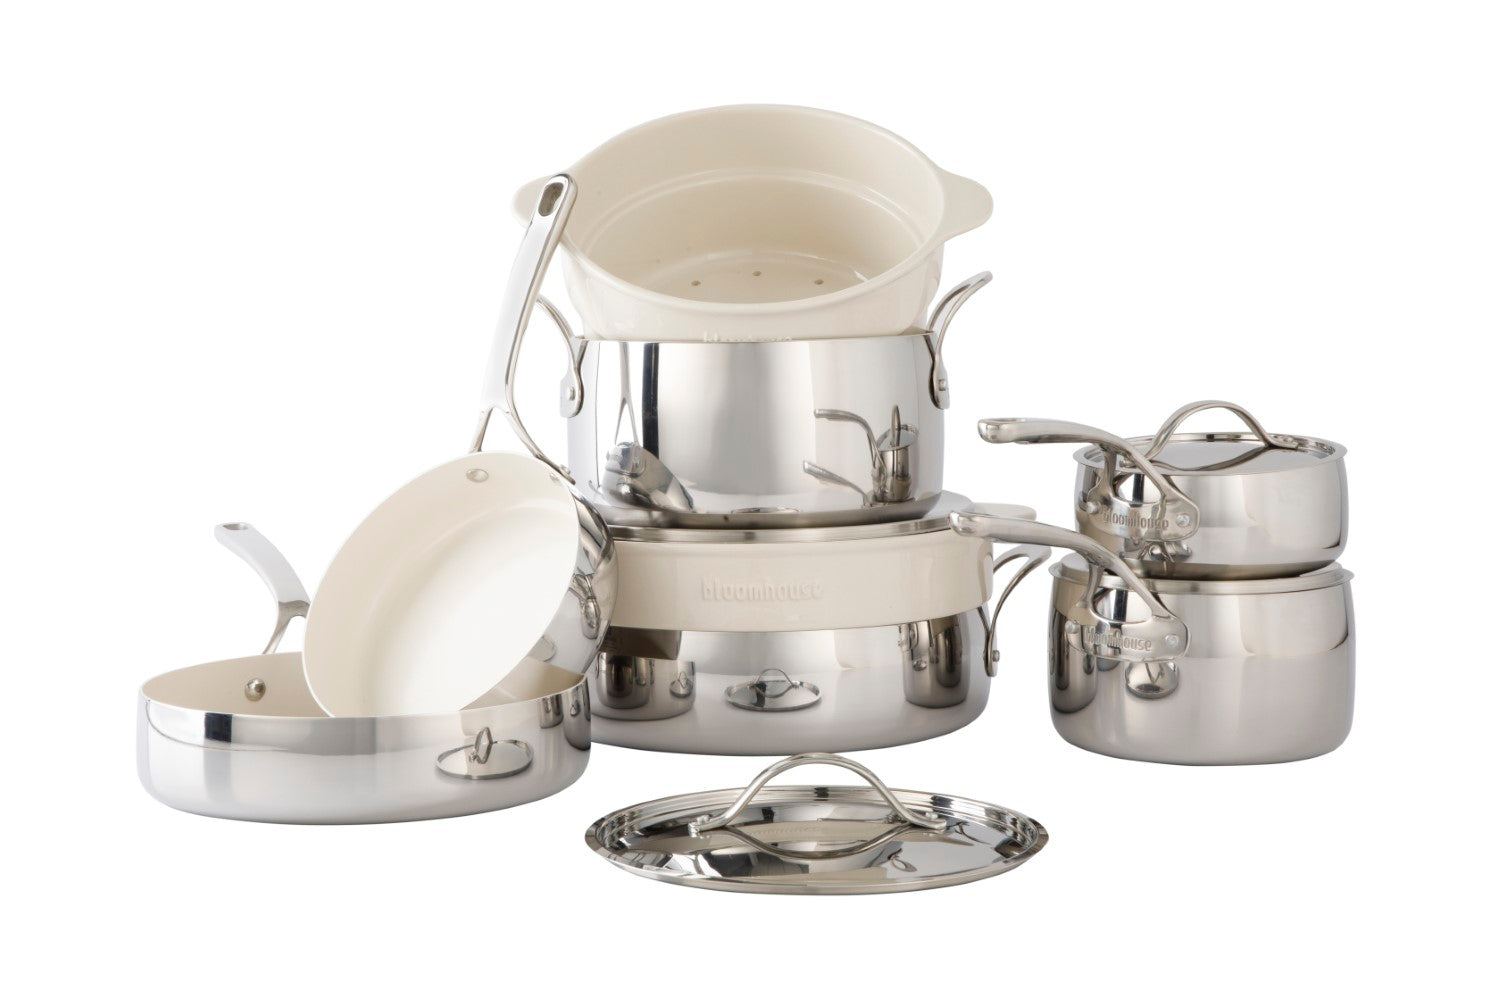 Bloomhouse 12-Piece Tri-Ply Stainless Steel Cookware Set